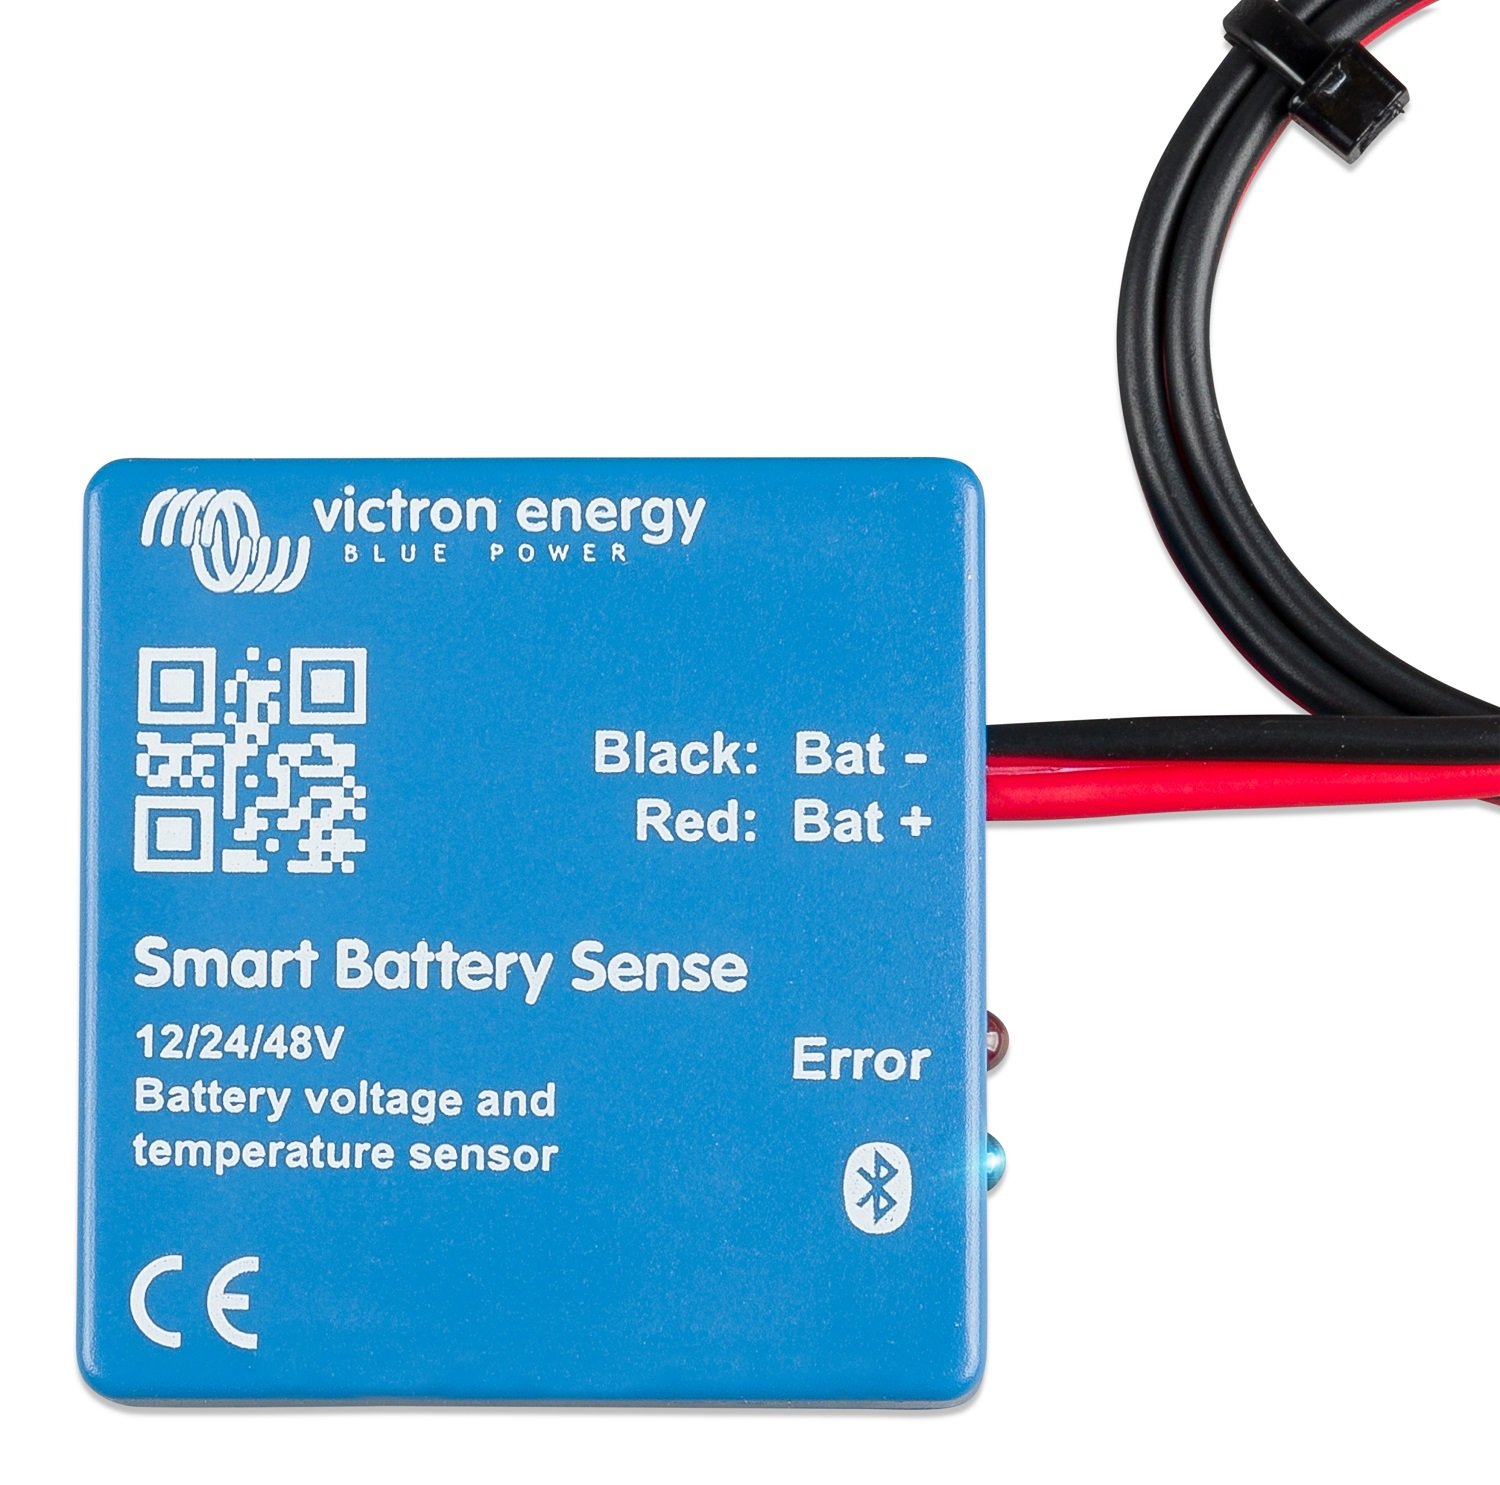 Can the Victron Smart Battery Sense function with any type of batteries?